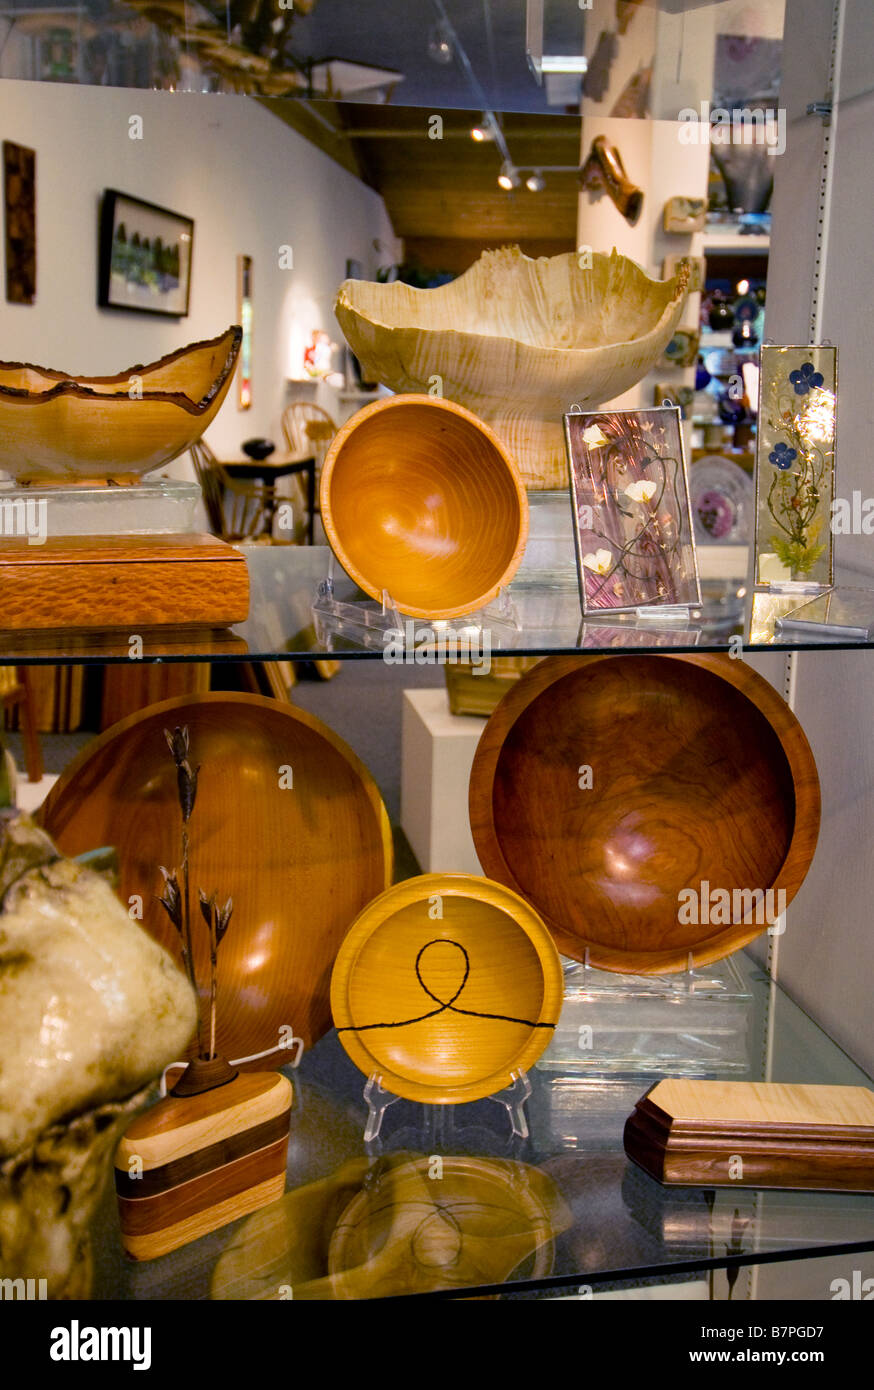 Exhibit of regional crafts at the Appalachian Center for Crafts in Smithville Tennessee Stock Photo